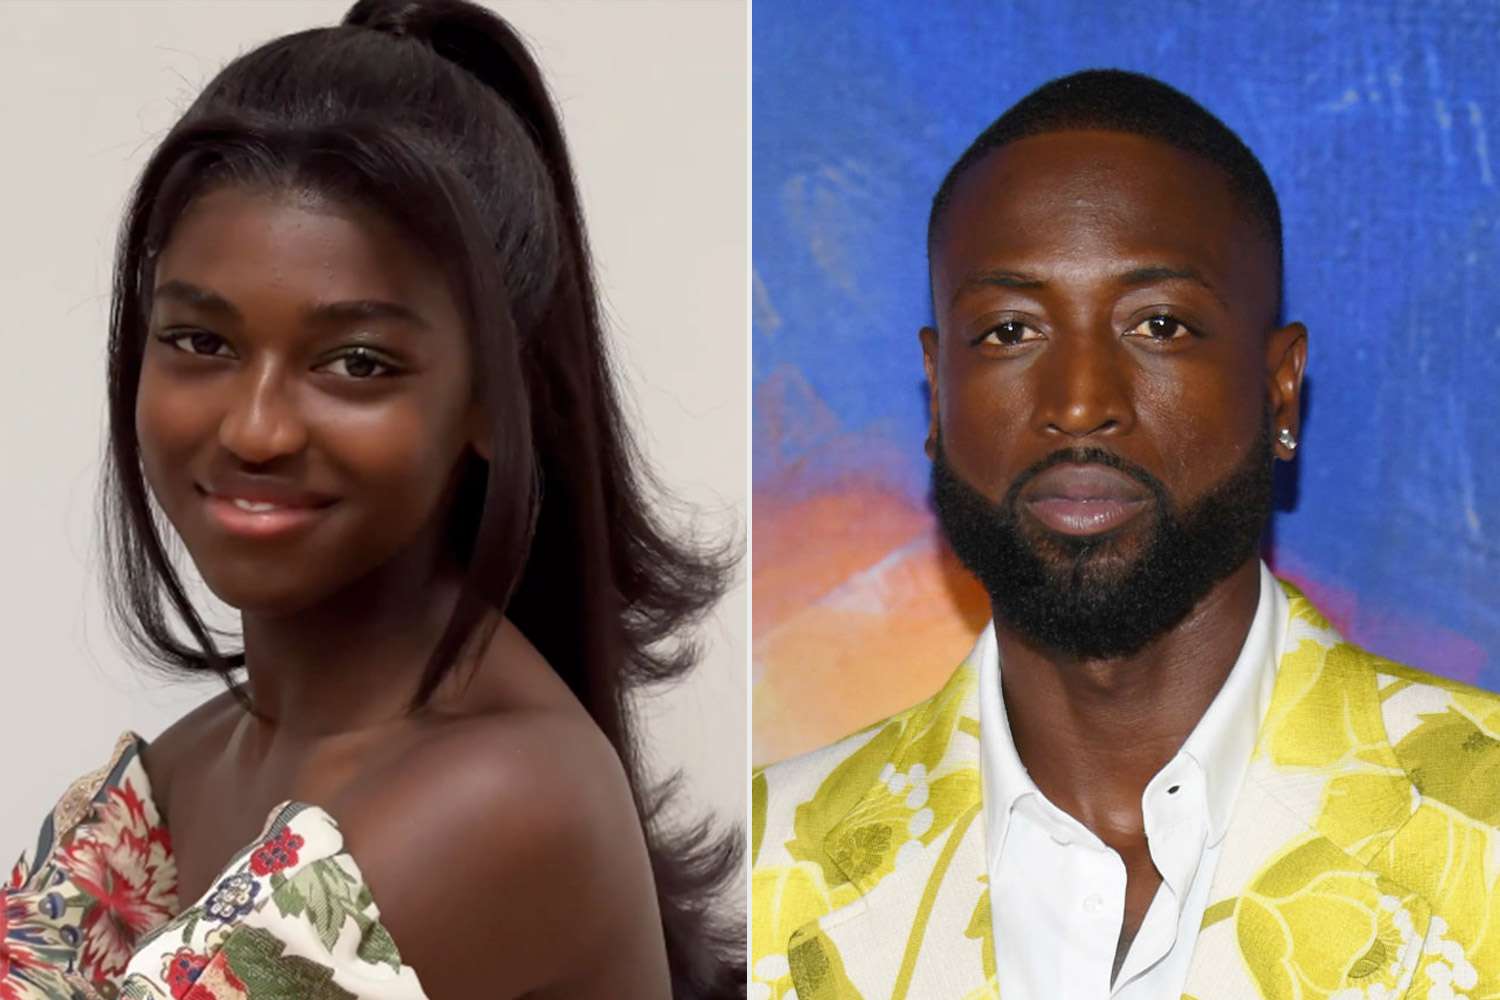 Knicks Fans Asks Dwyane Wade Why He Mutilated His Son Now Daughter Zaya and Used Her For Profit